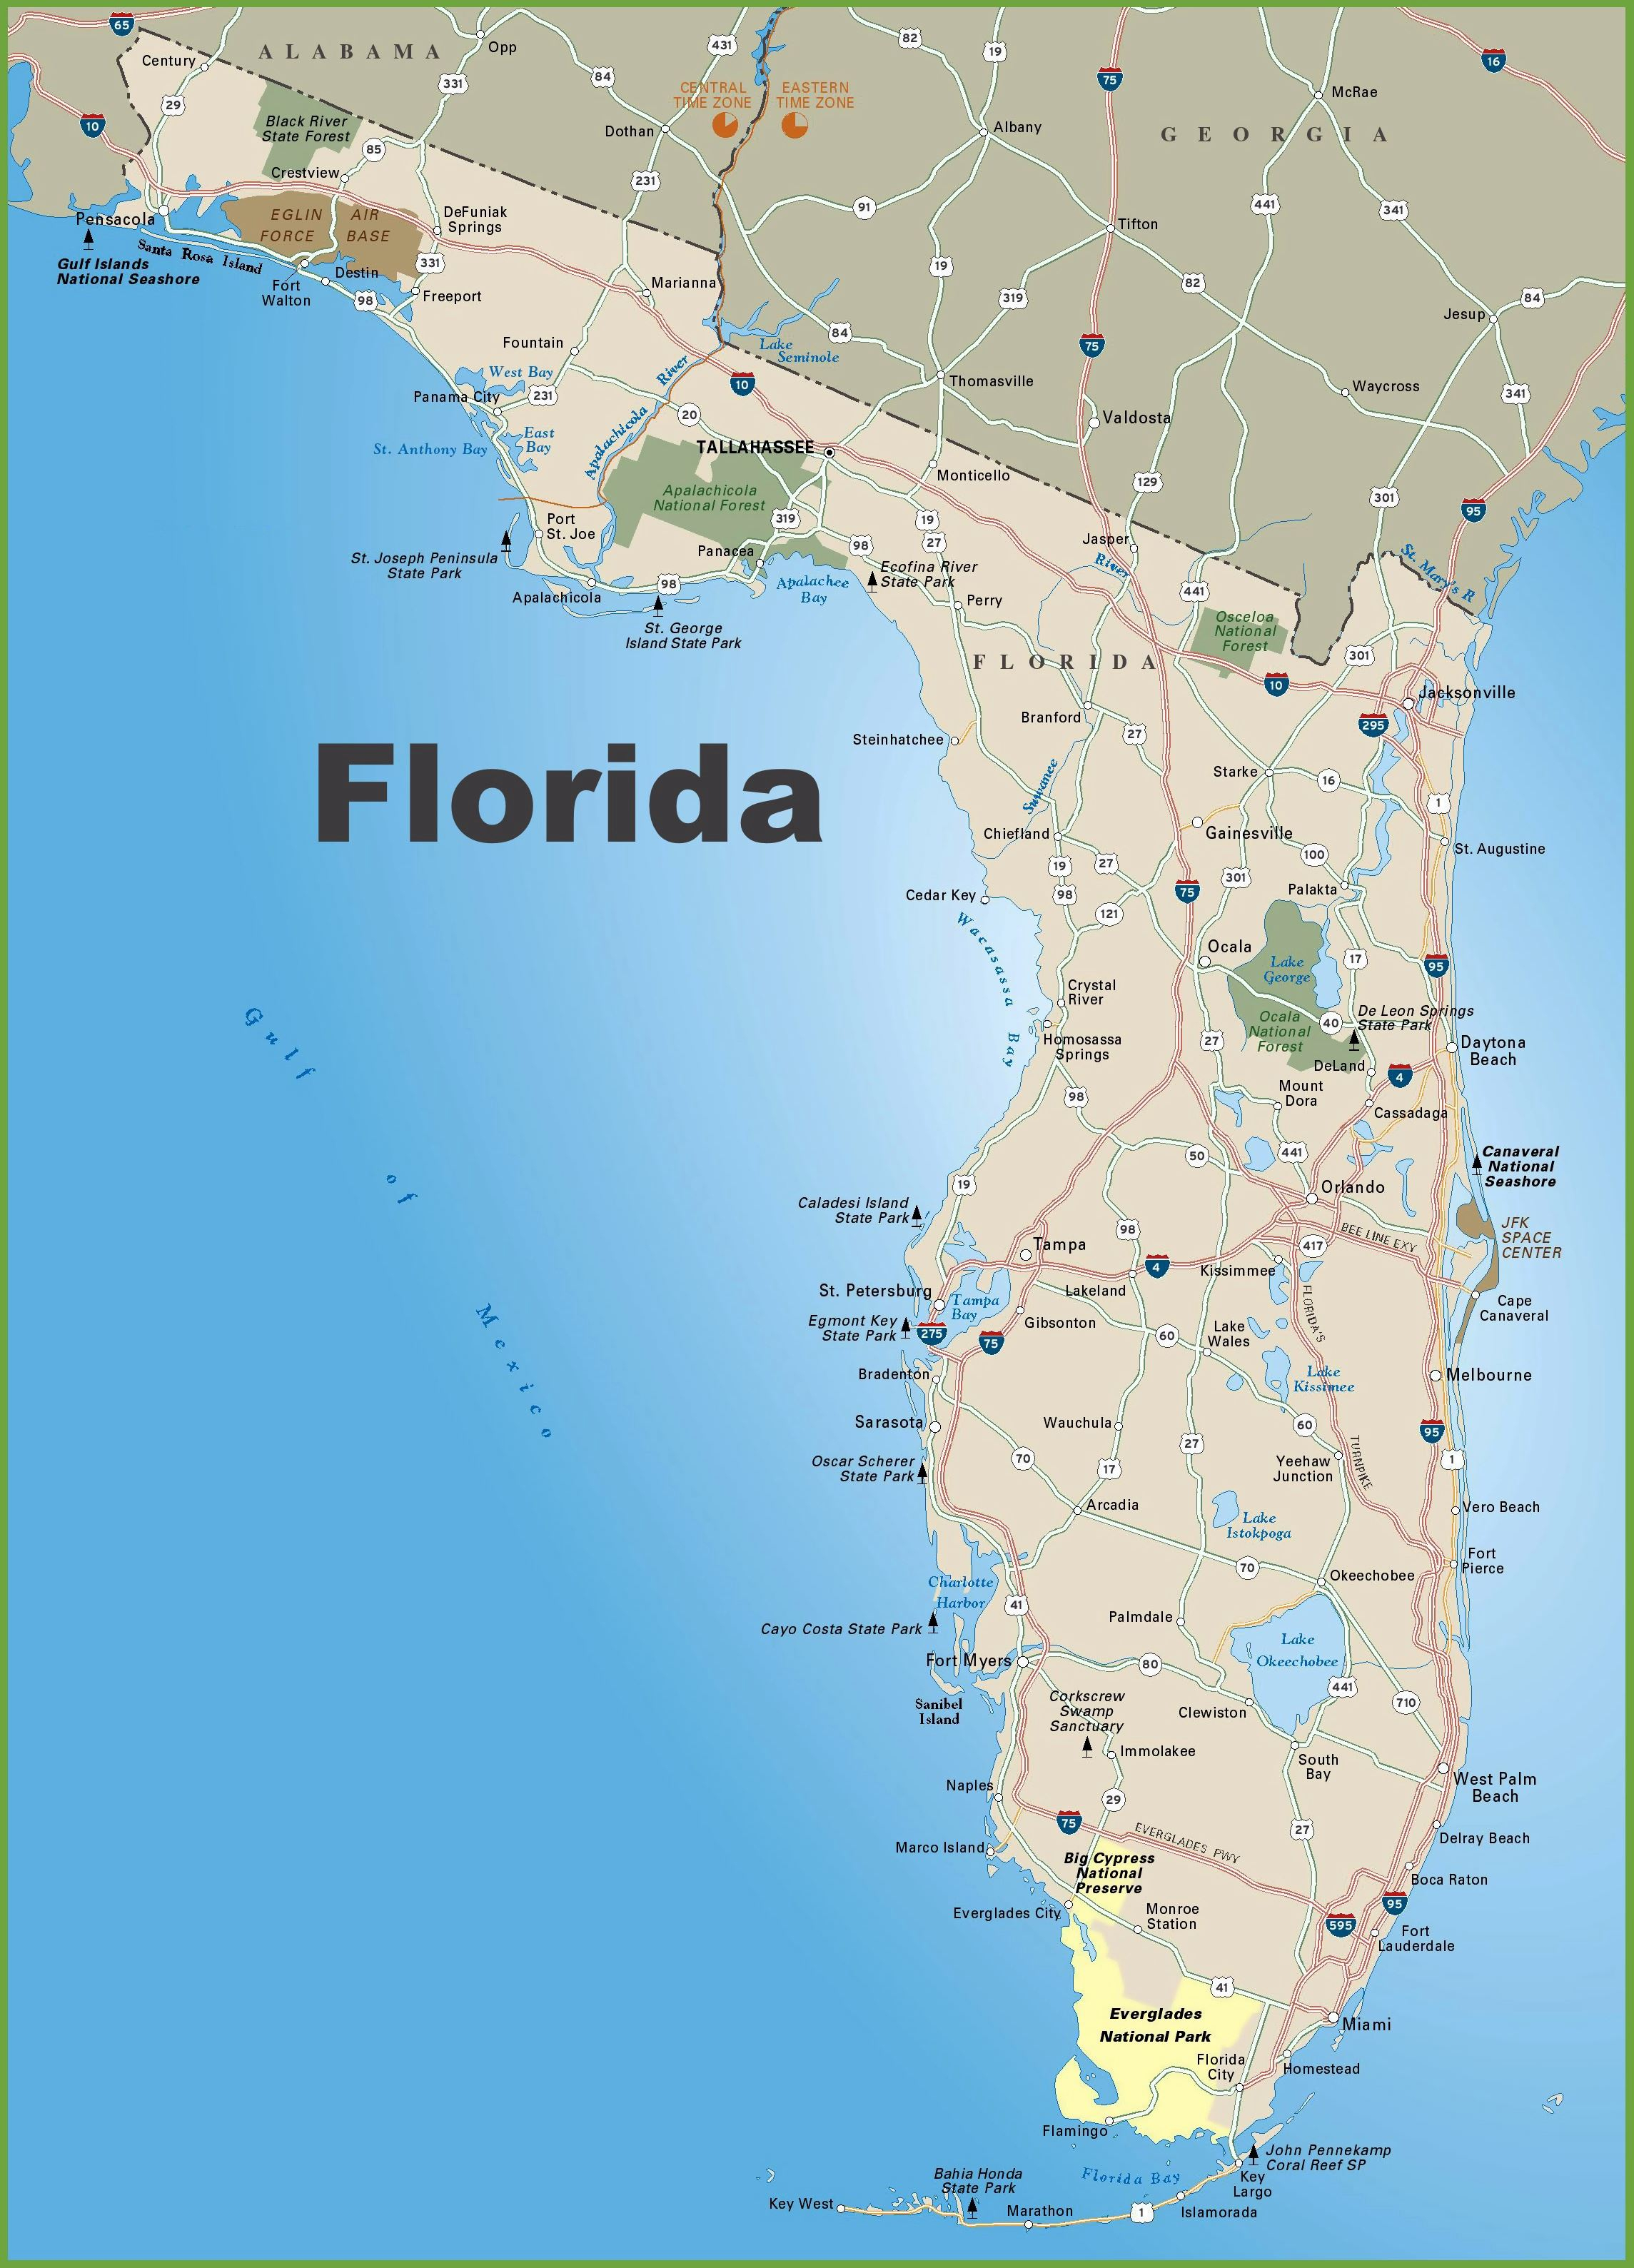 Large Florida Maps For Free Download And Print | High-Resolution And - Brooksville Florida Map